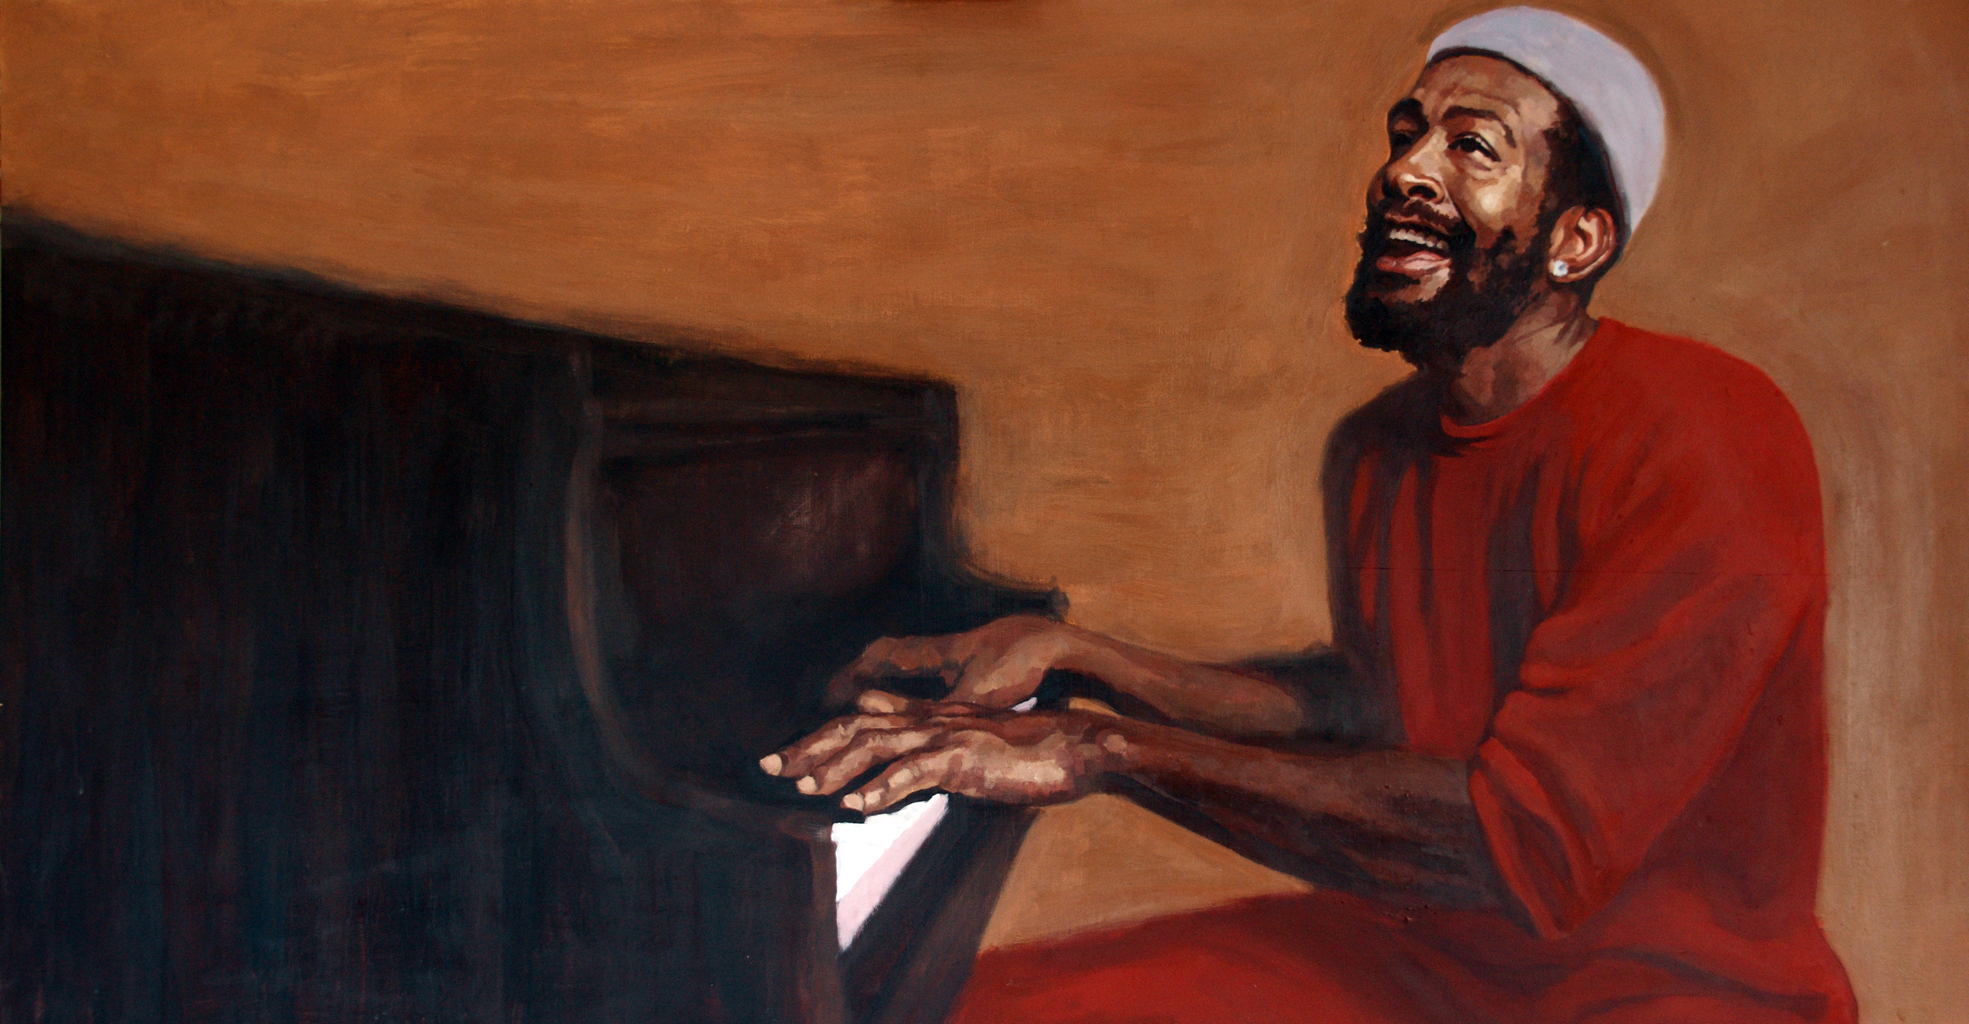 Best 52+ Marvin Gaye Wallpapers on HipWallpapers.